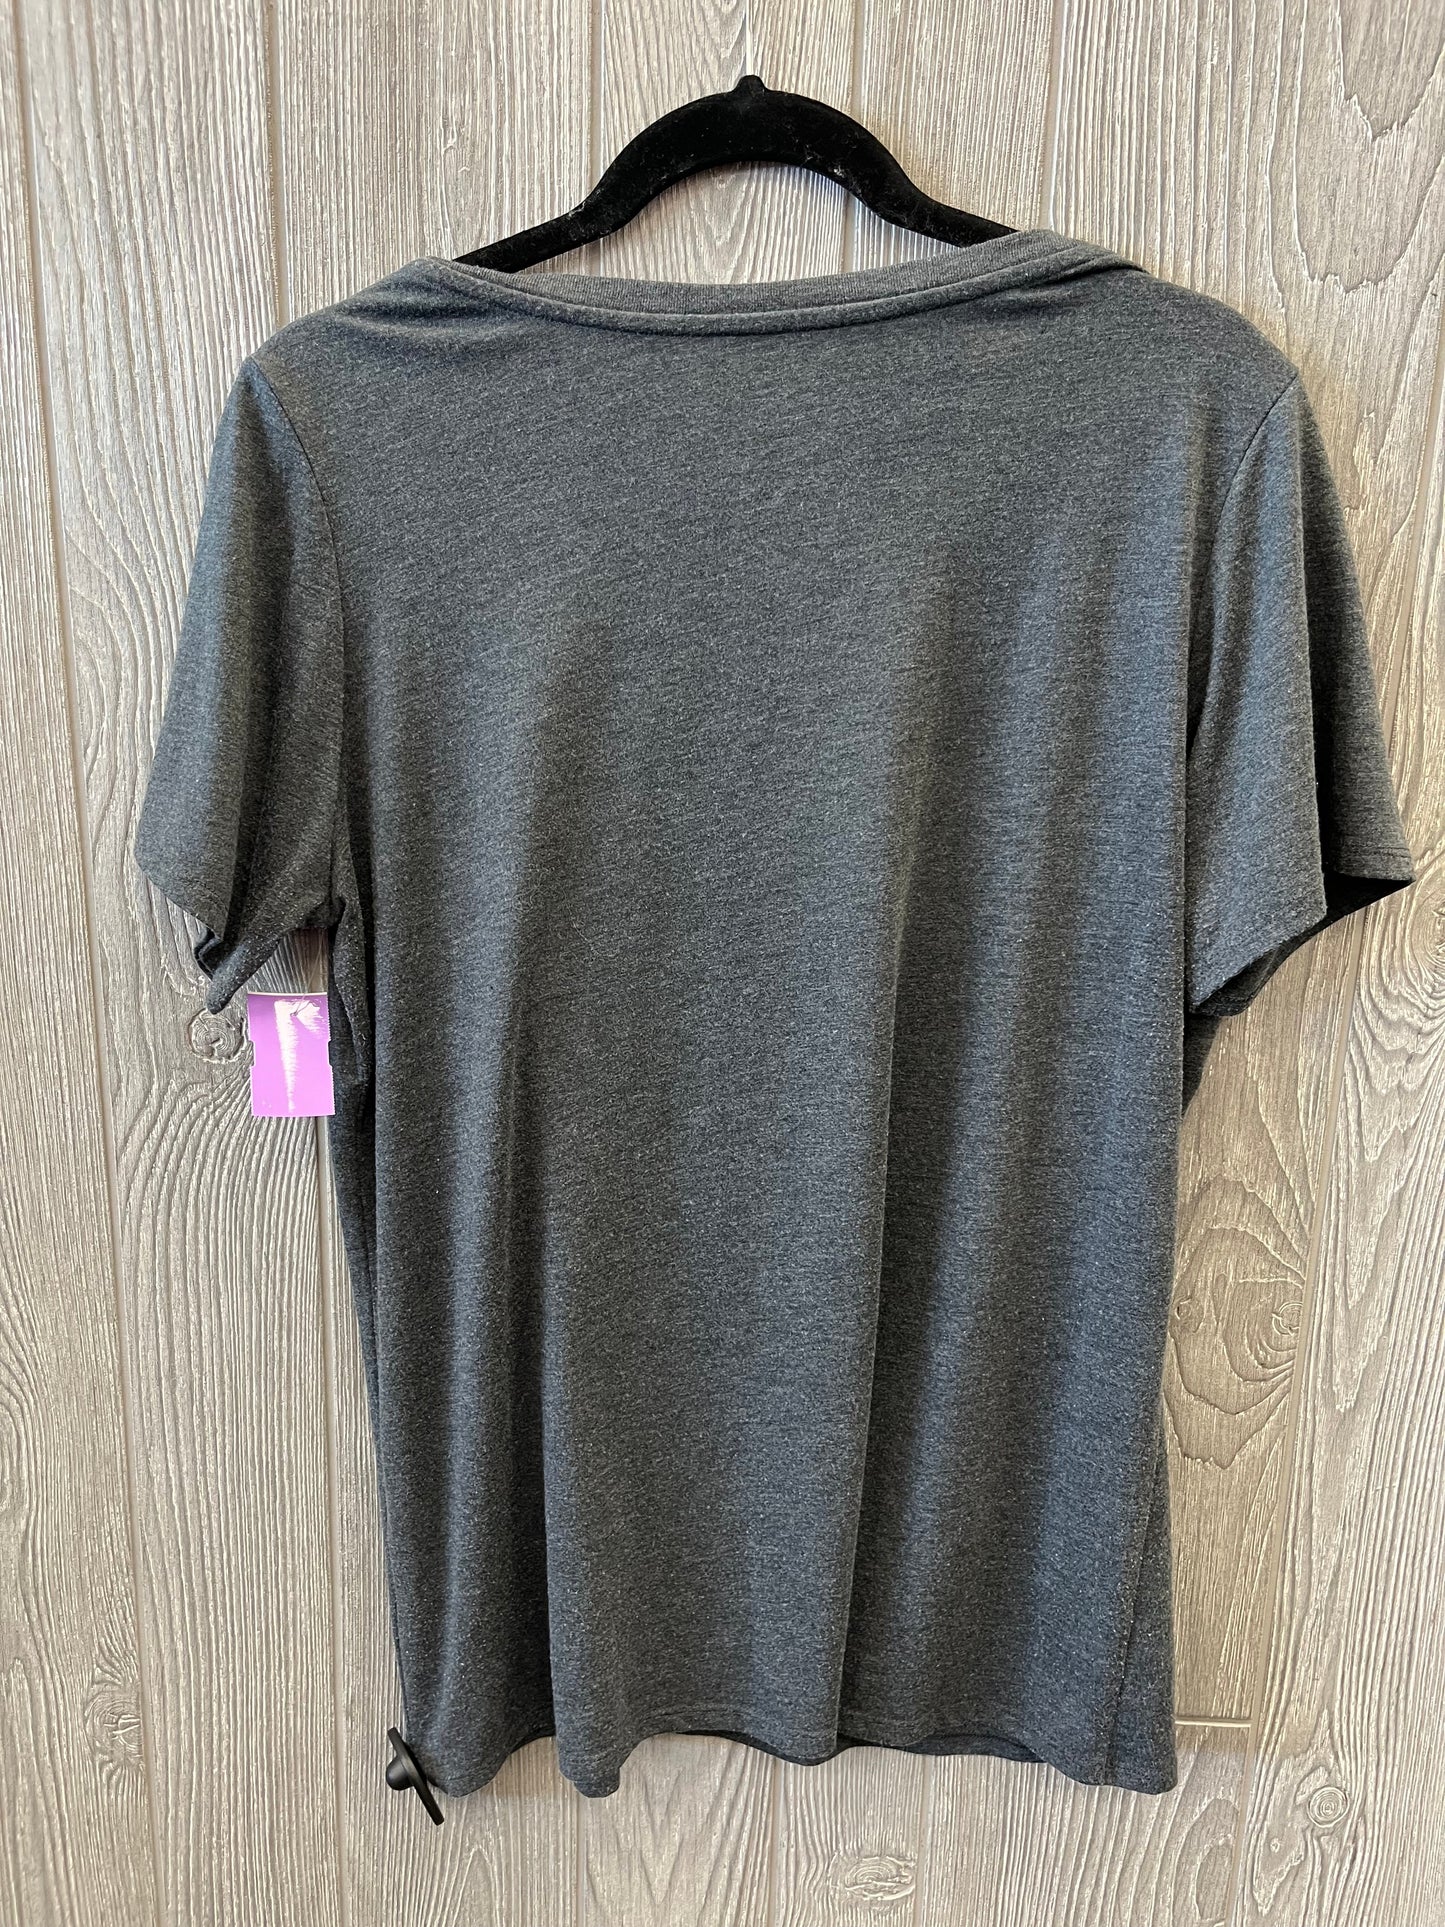 Grey Athletic Top Short Sleeve Nike Apparel, Size L